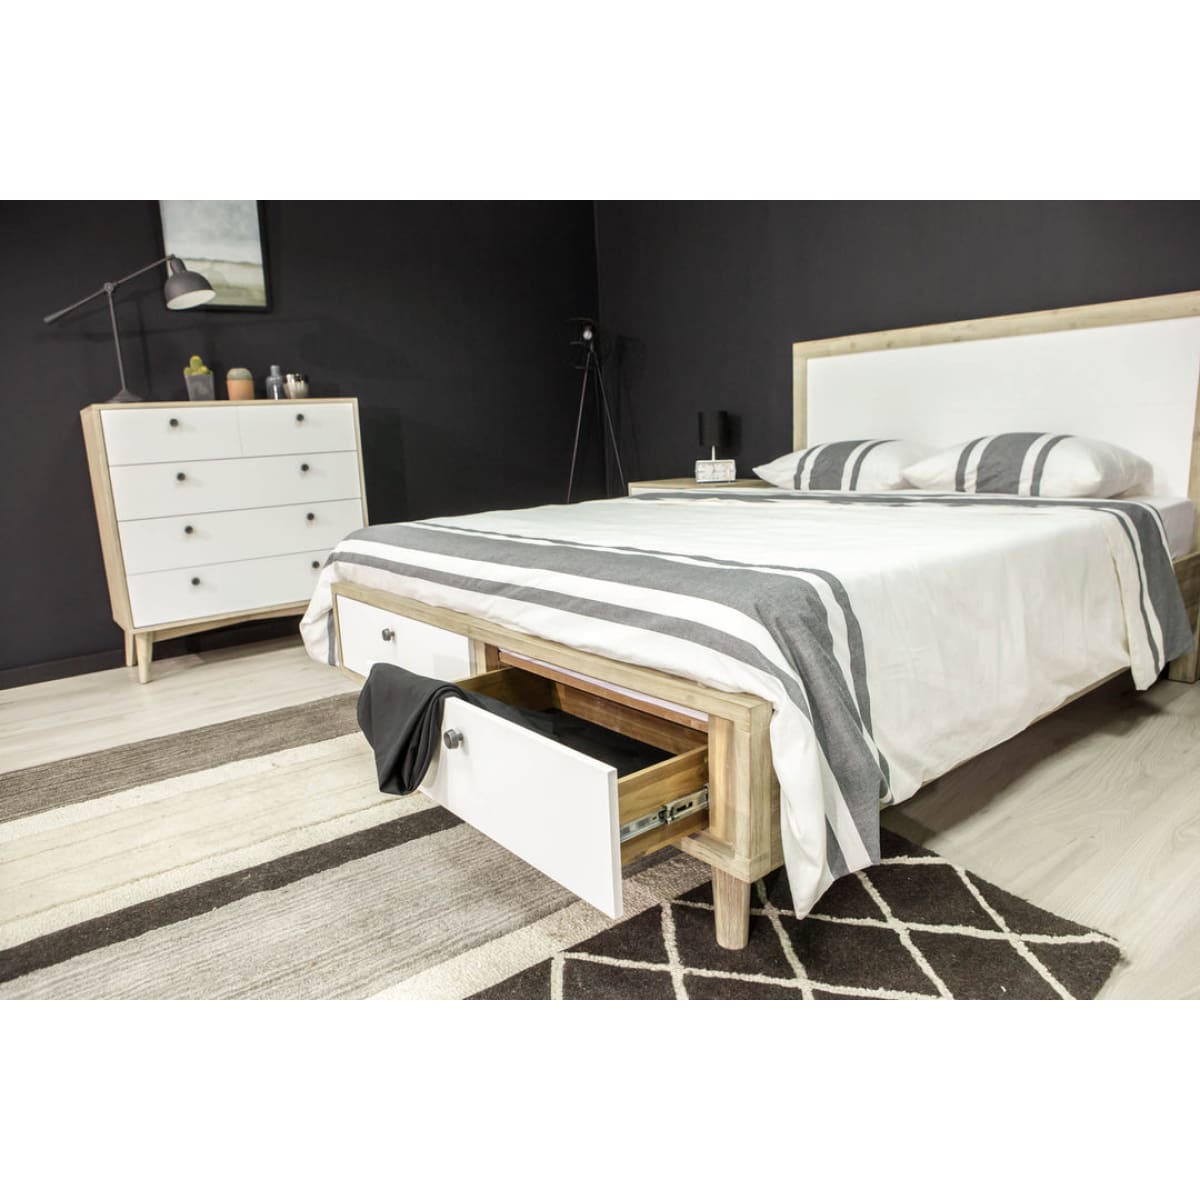 Ava King Bed - lh-import-beds